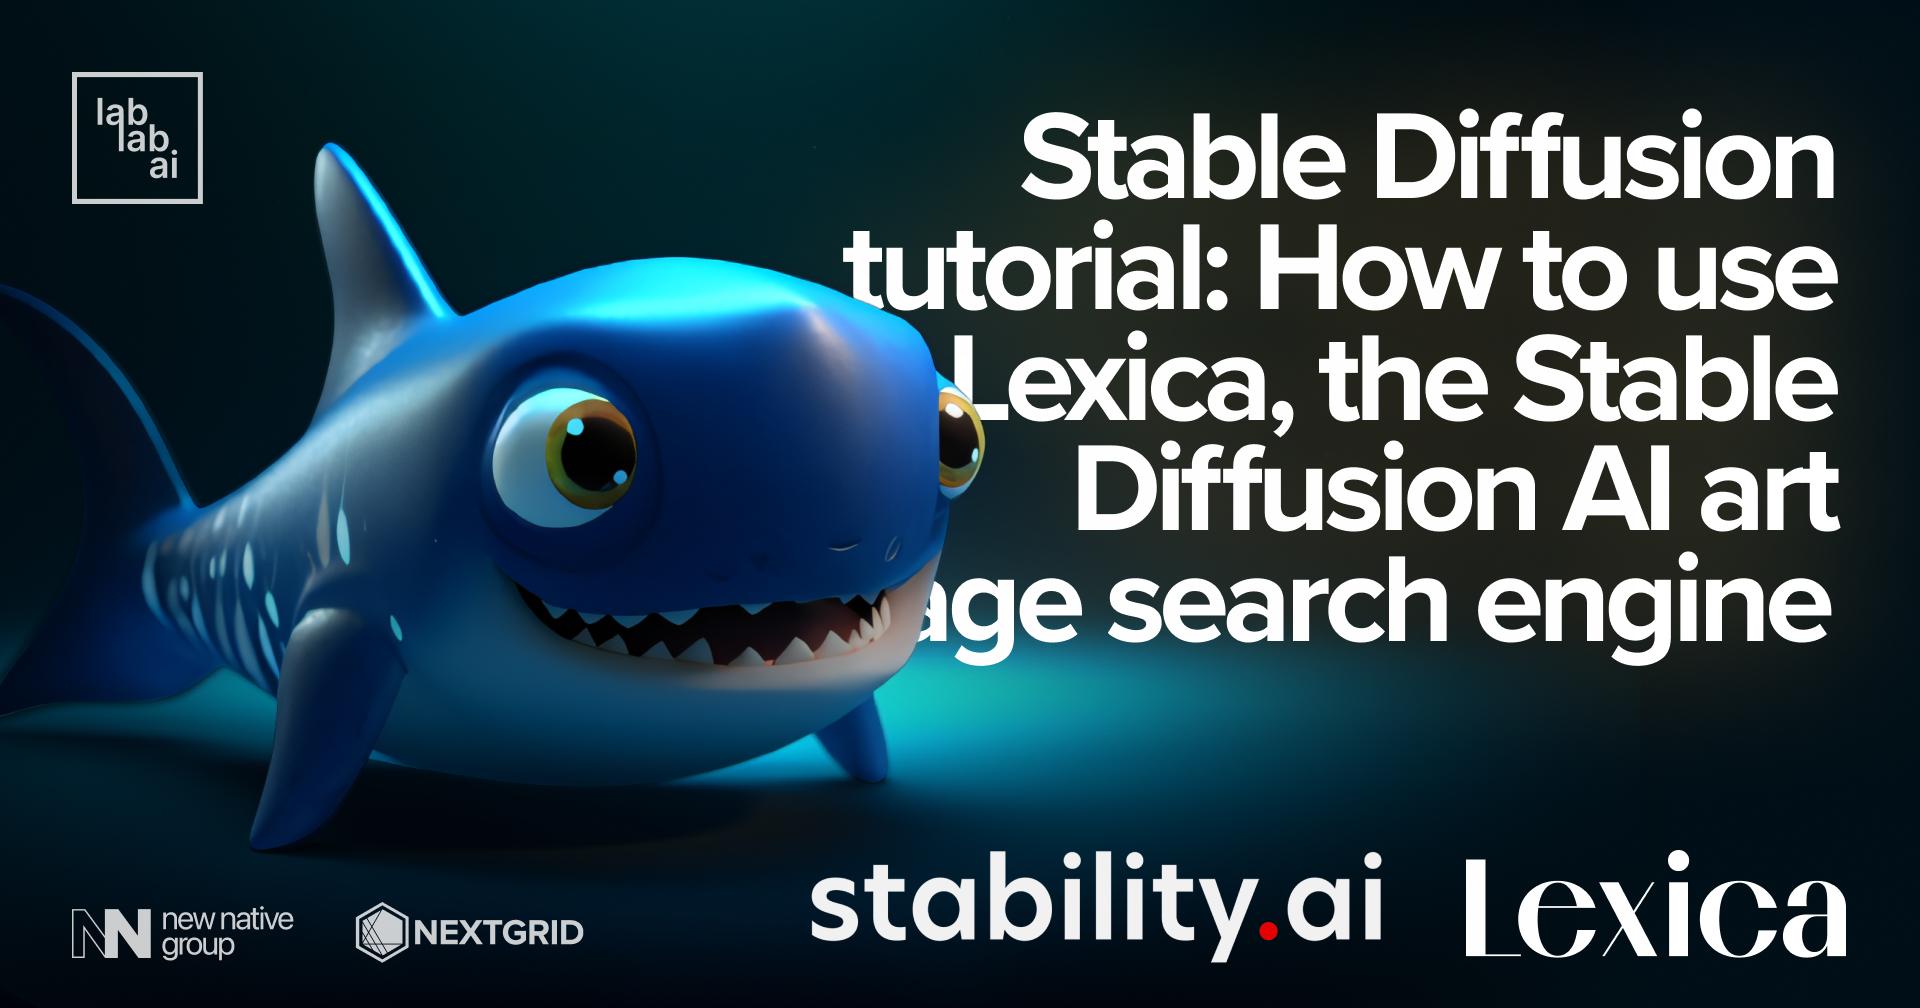 Stable Diffusion tutorial: How to use Lexica, the Stable Diffusion AI art image search engine description: In this Stable Diffusion prompt tutorial we will show you how to use Stable Diffusion and how you can use their API for your next project.